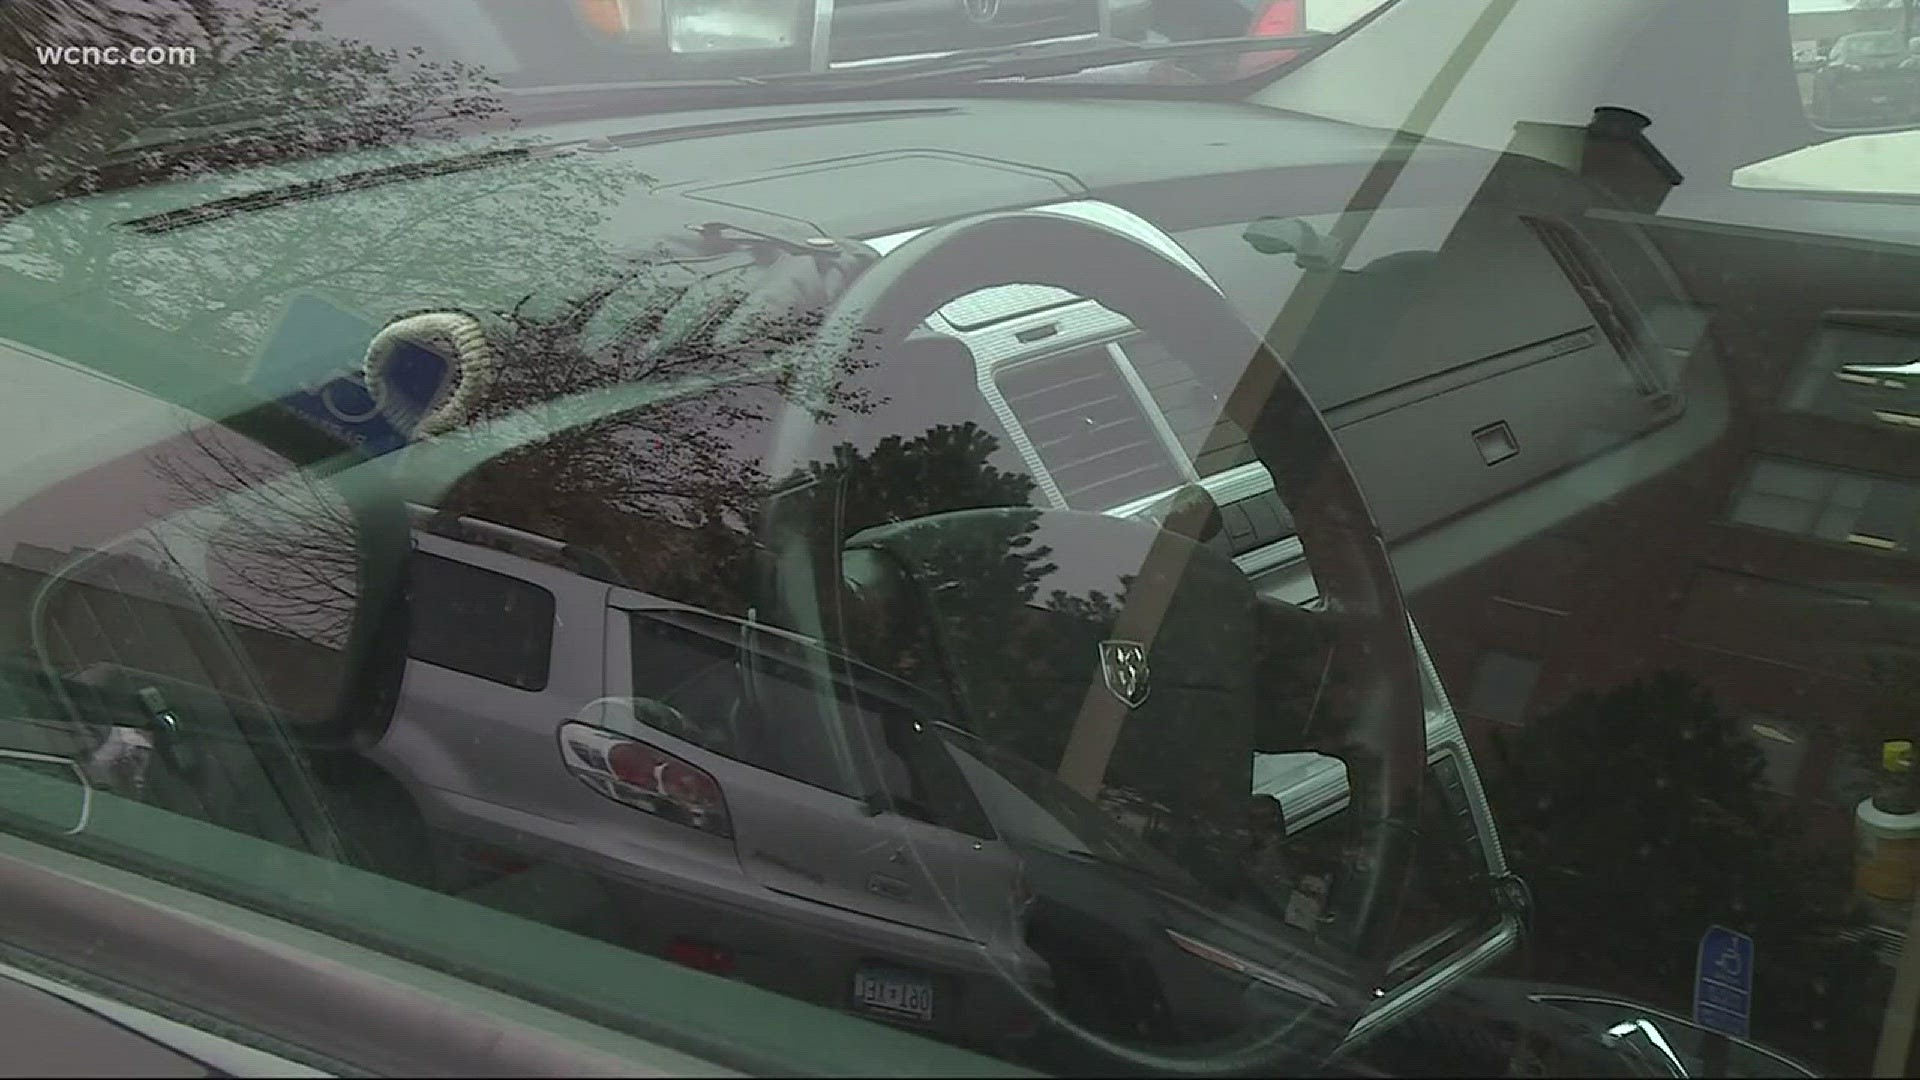 CMPD are telling drivers to think twice about leaving your car while "warming up."